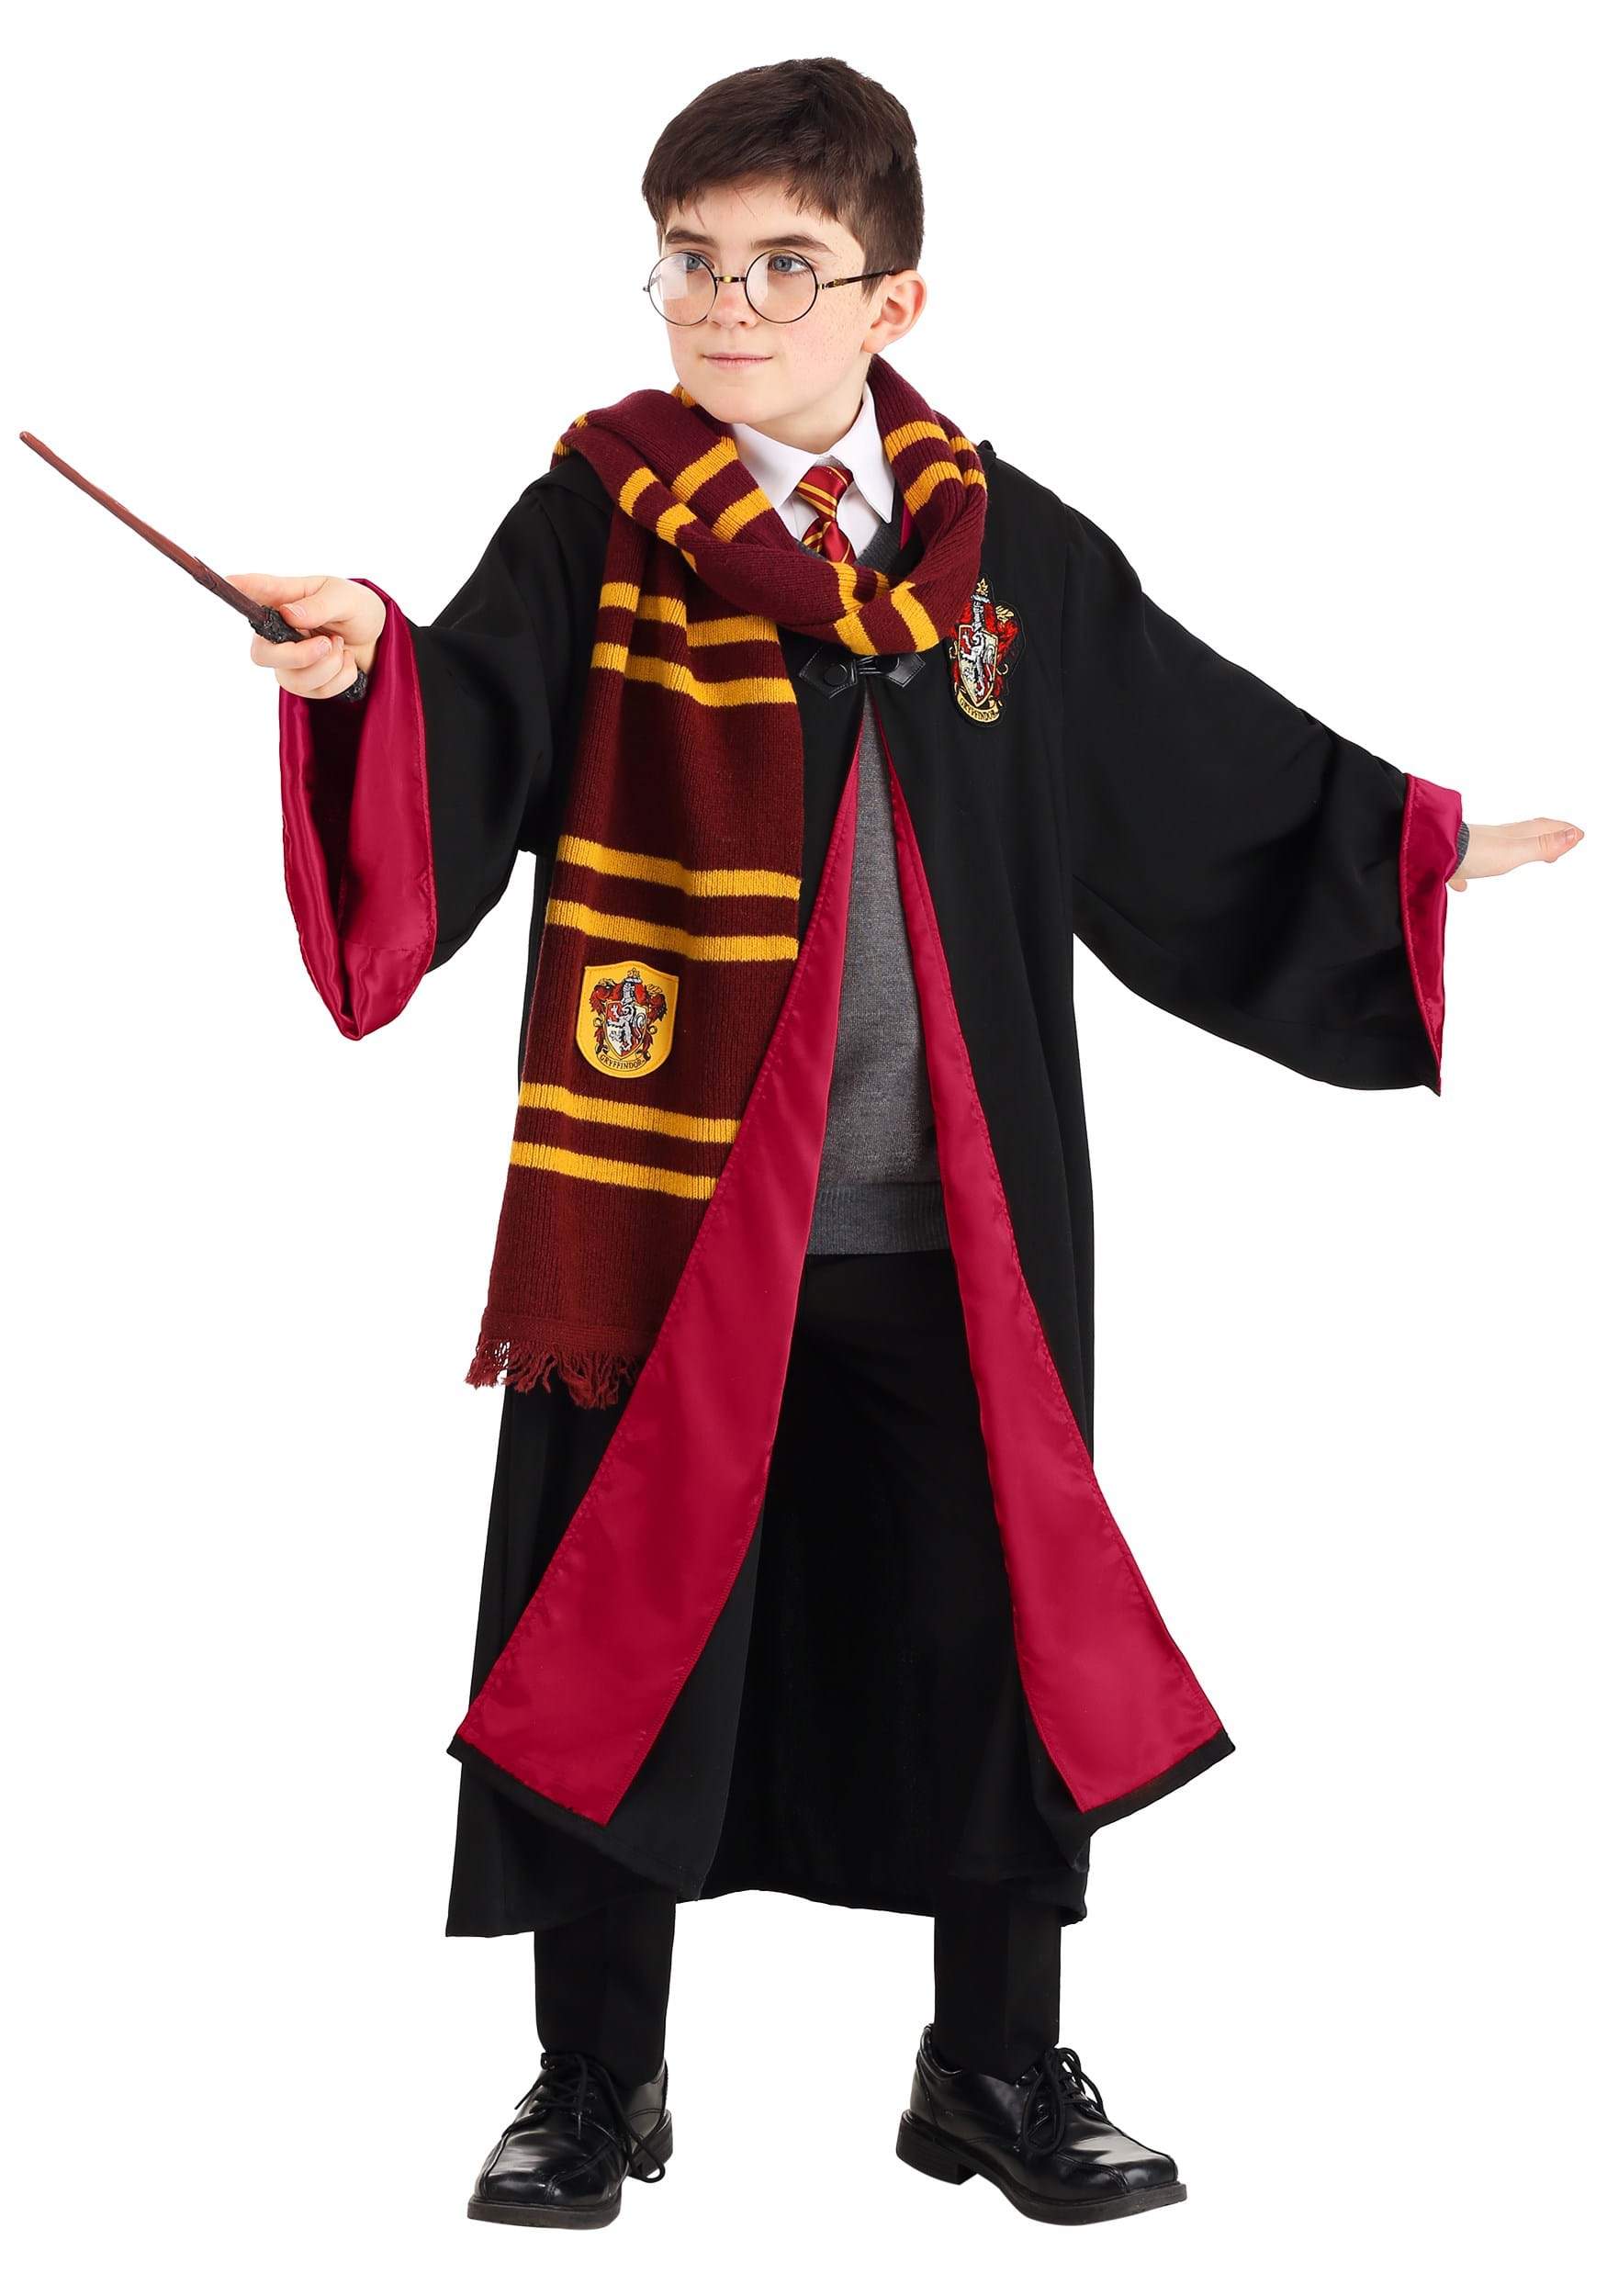 How to be harry potter for halloween | gail's blog